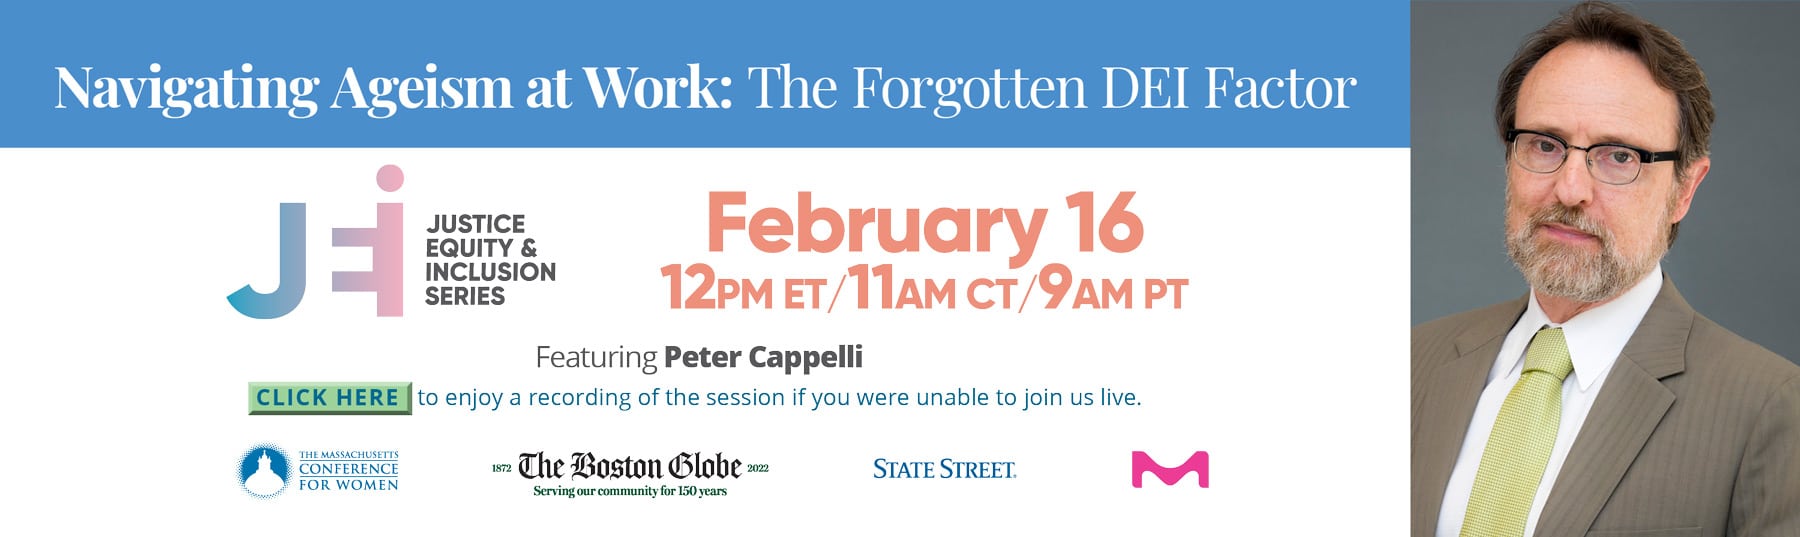 Navigating Ageism at Work: The Forgotten DEI Factor (replay) featuring Peter Cappelli and Nicole D. Smith